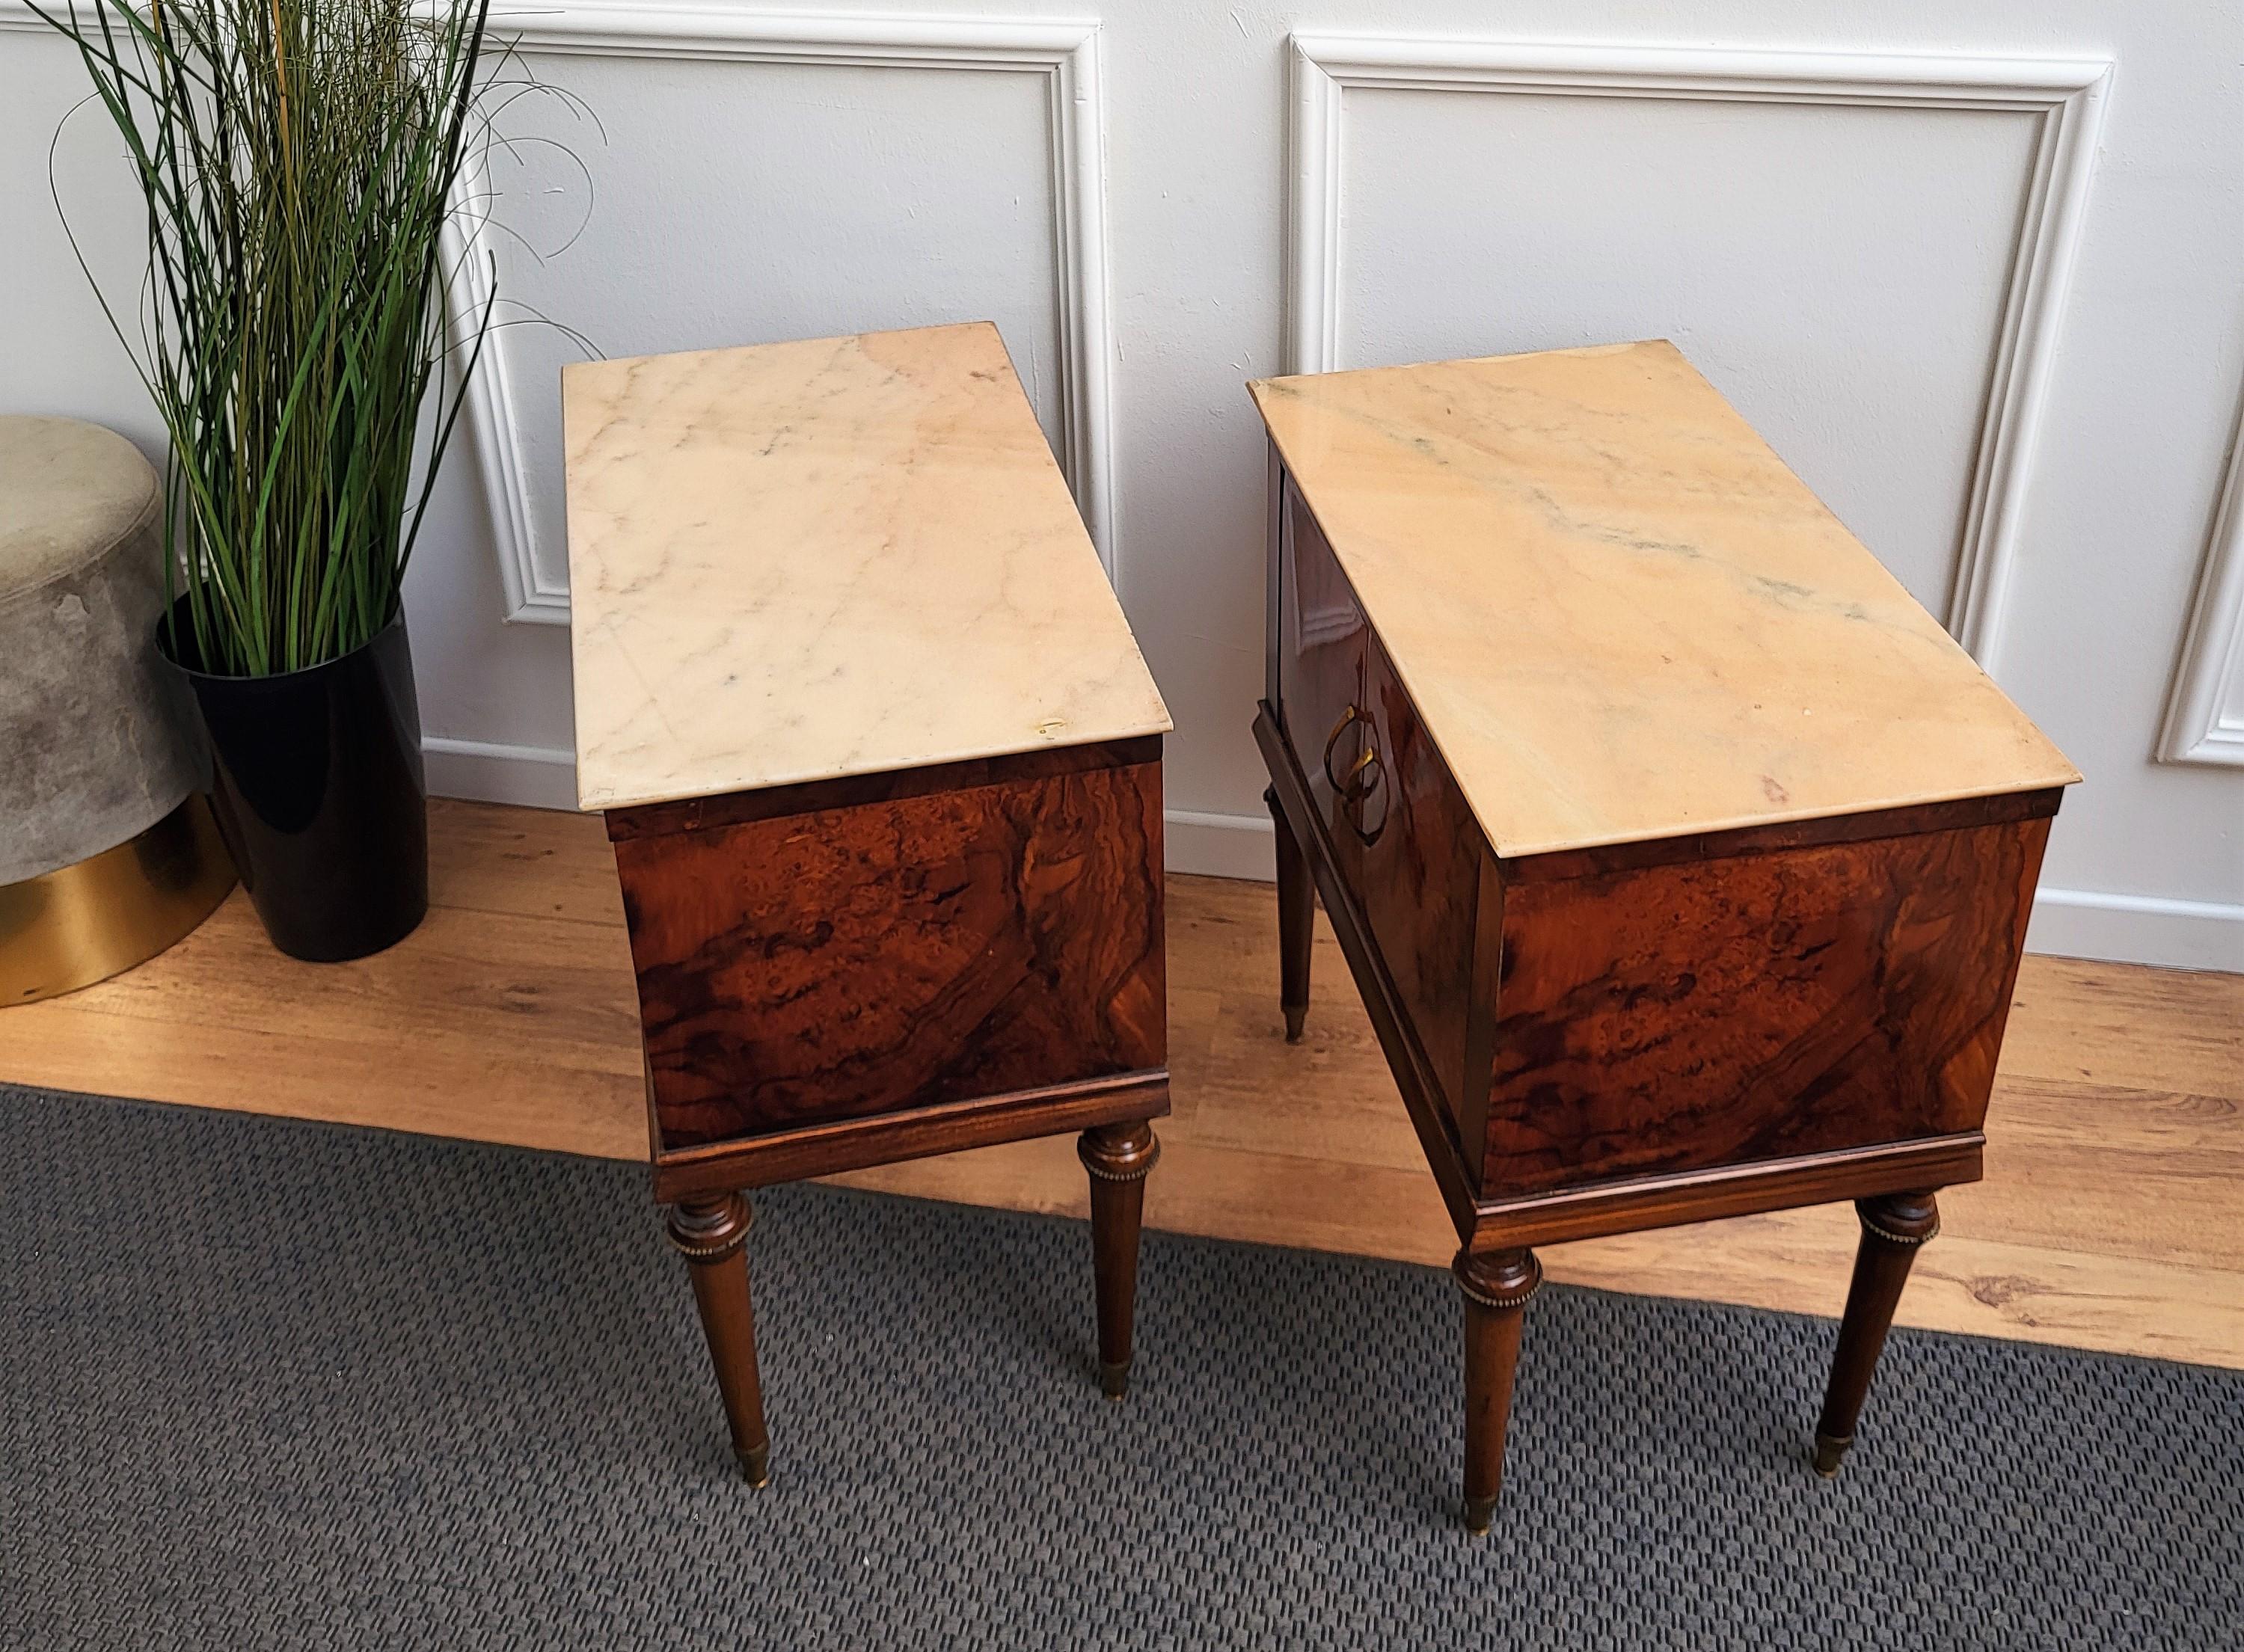 Pair of Mid-Century Italian Art Deco Nightstands Bedside Tables White Marble Top 1